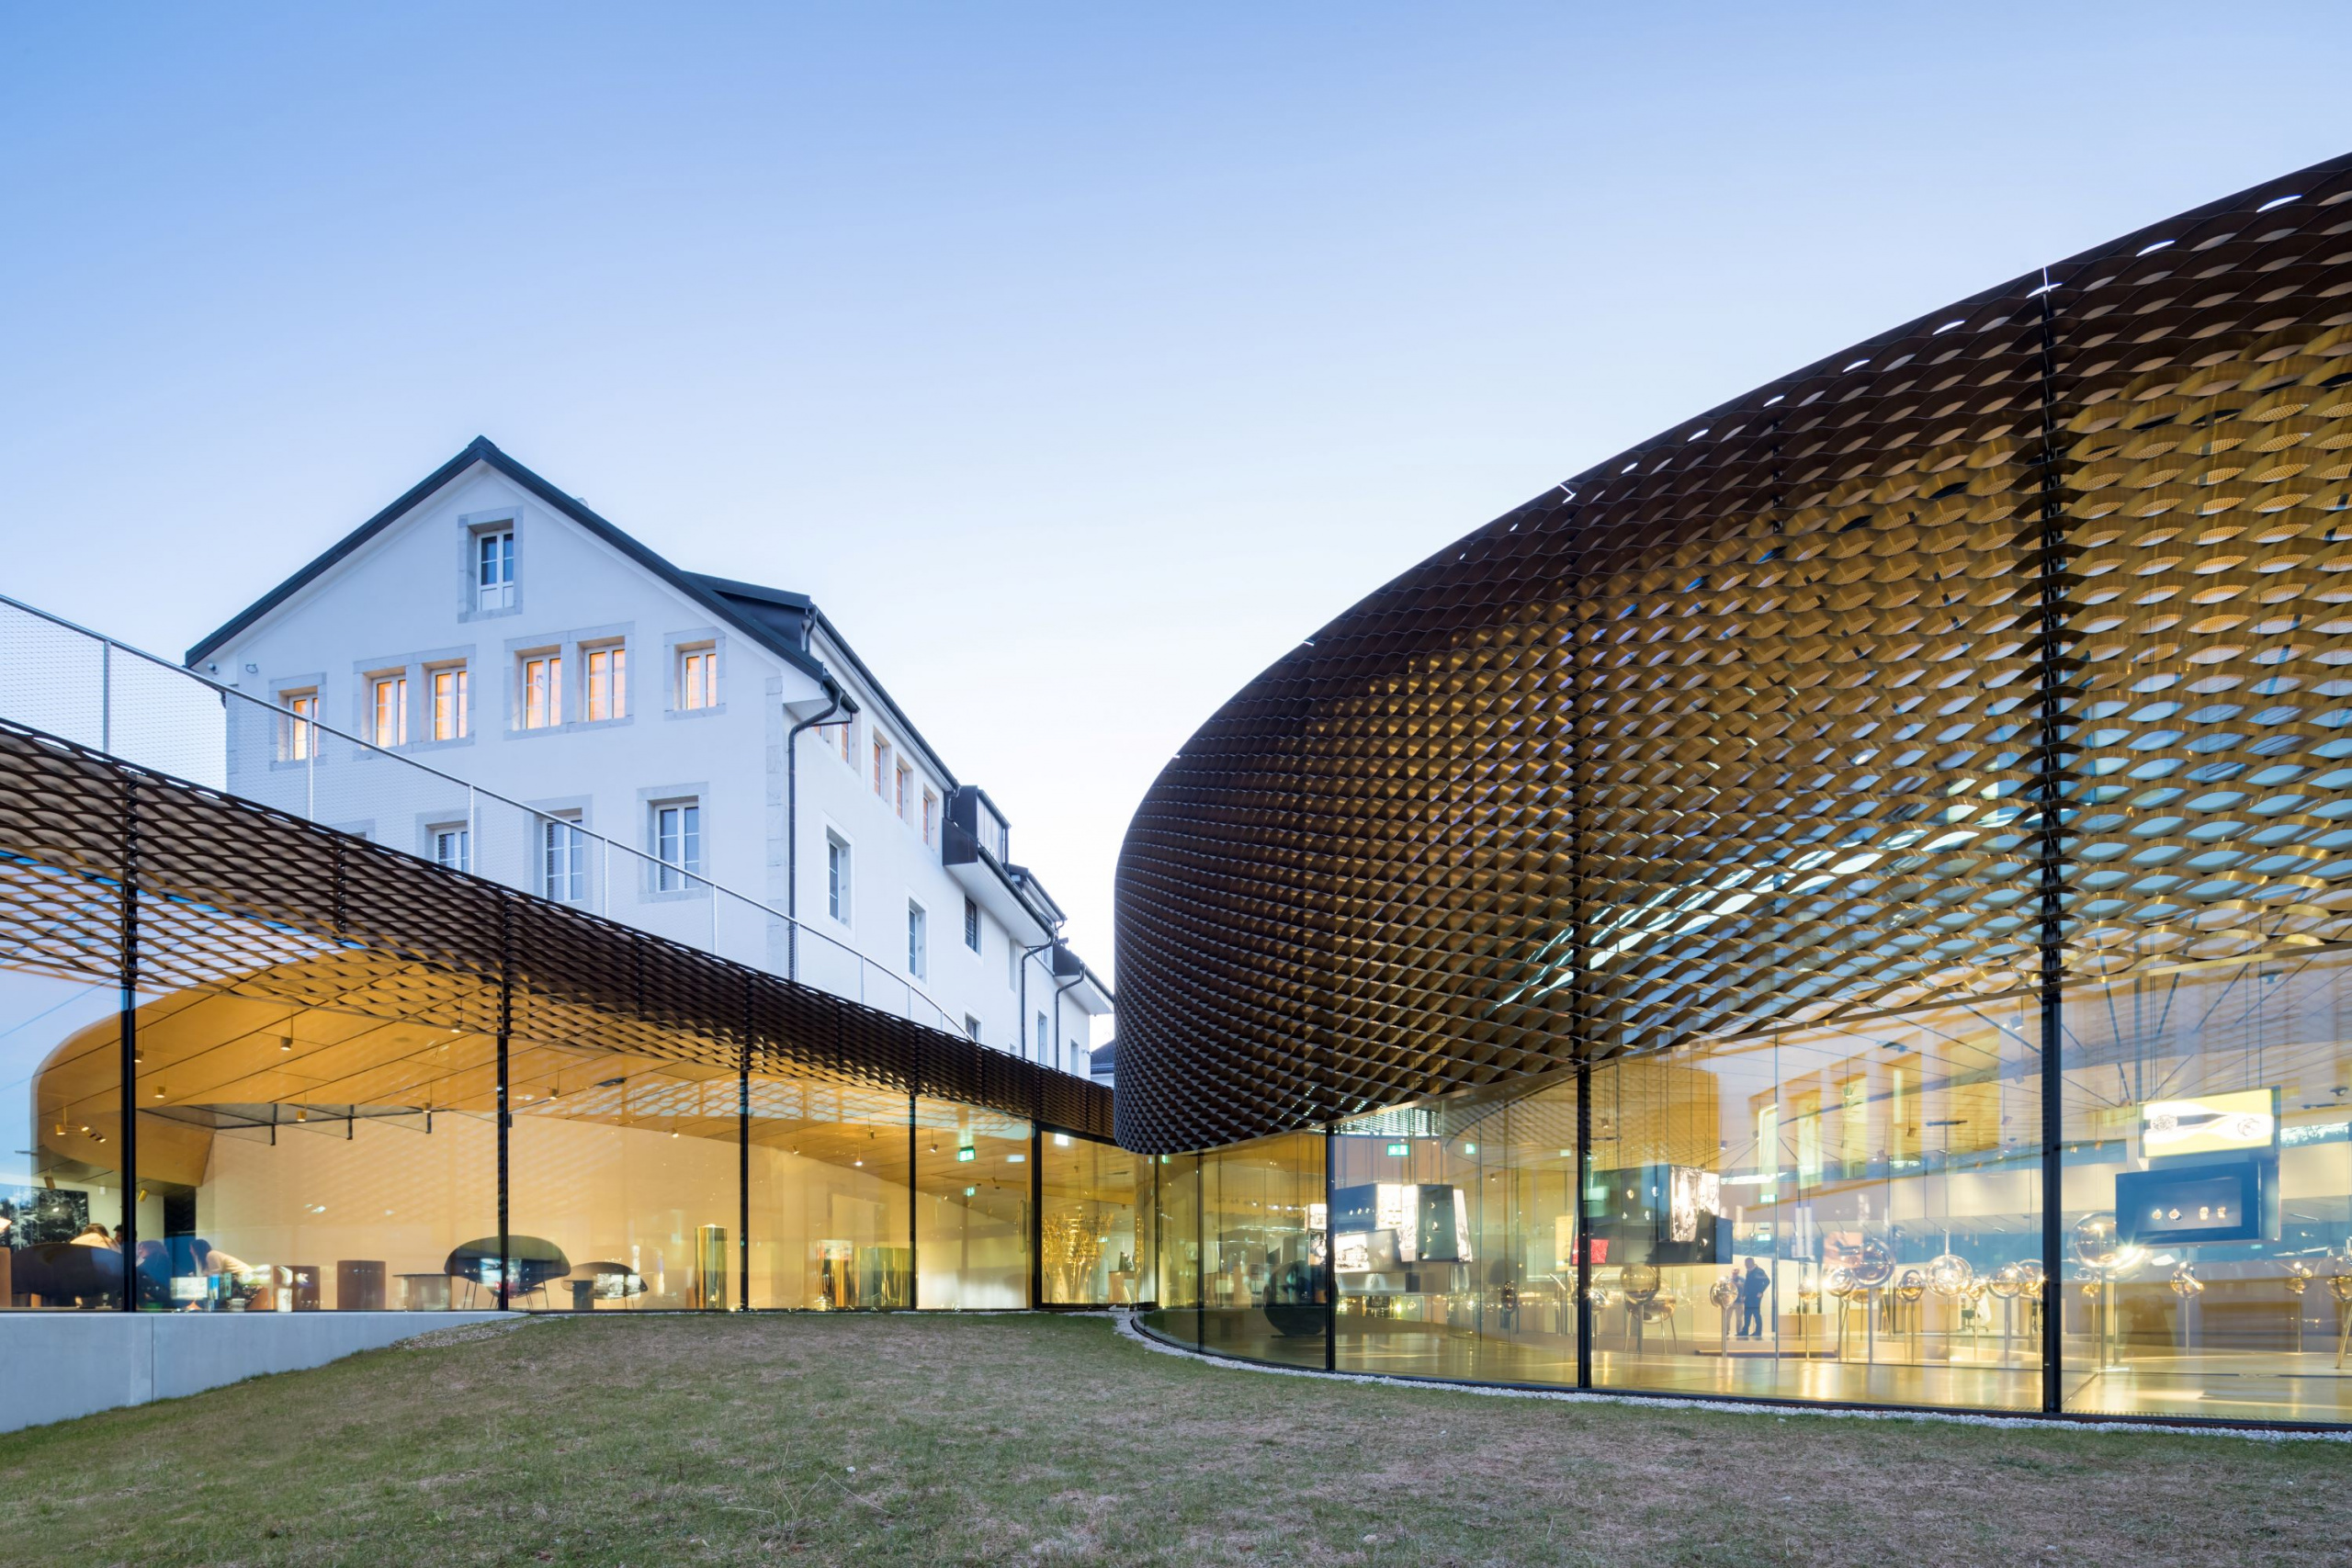 The outer surface of the curved walls of the museum is layered with brass mesh